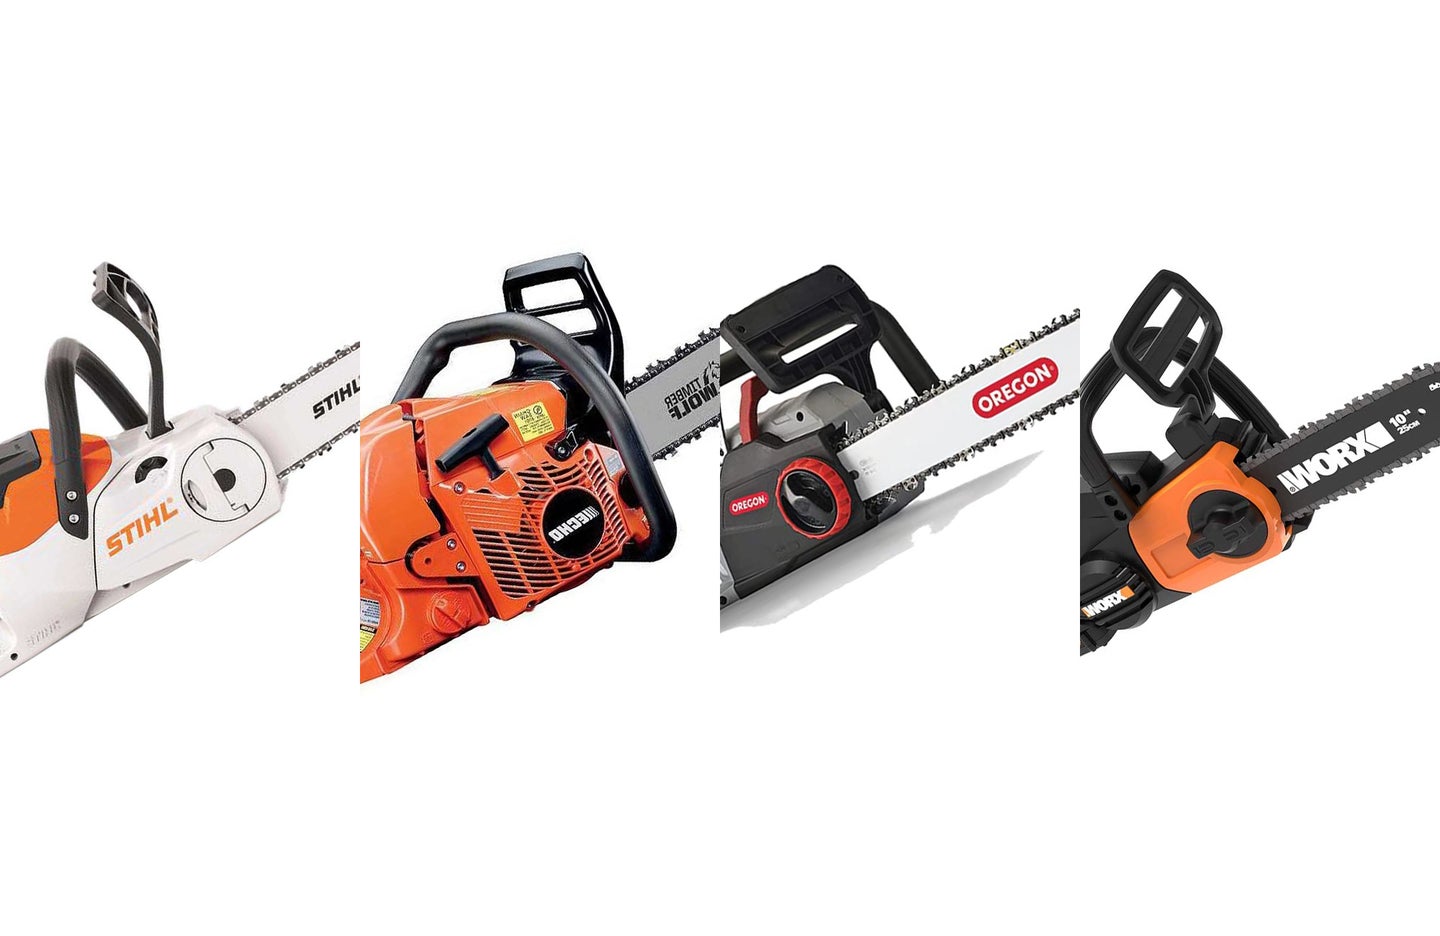 A lineup of the best chainsaws